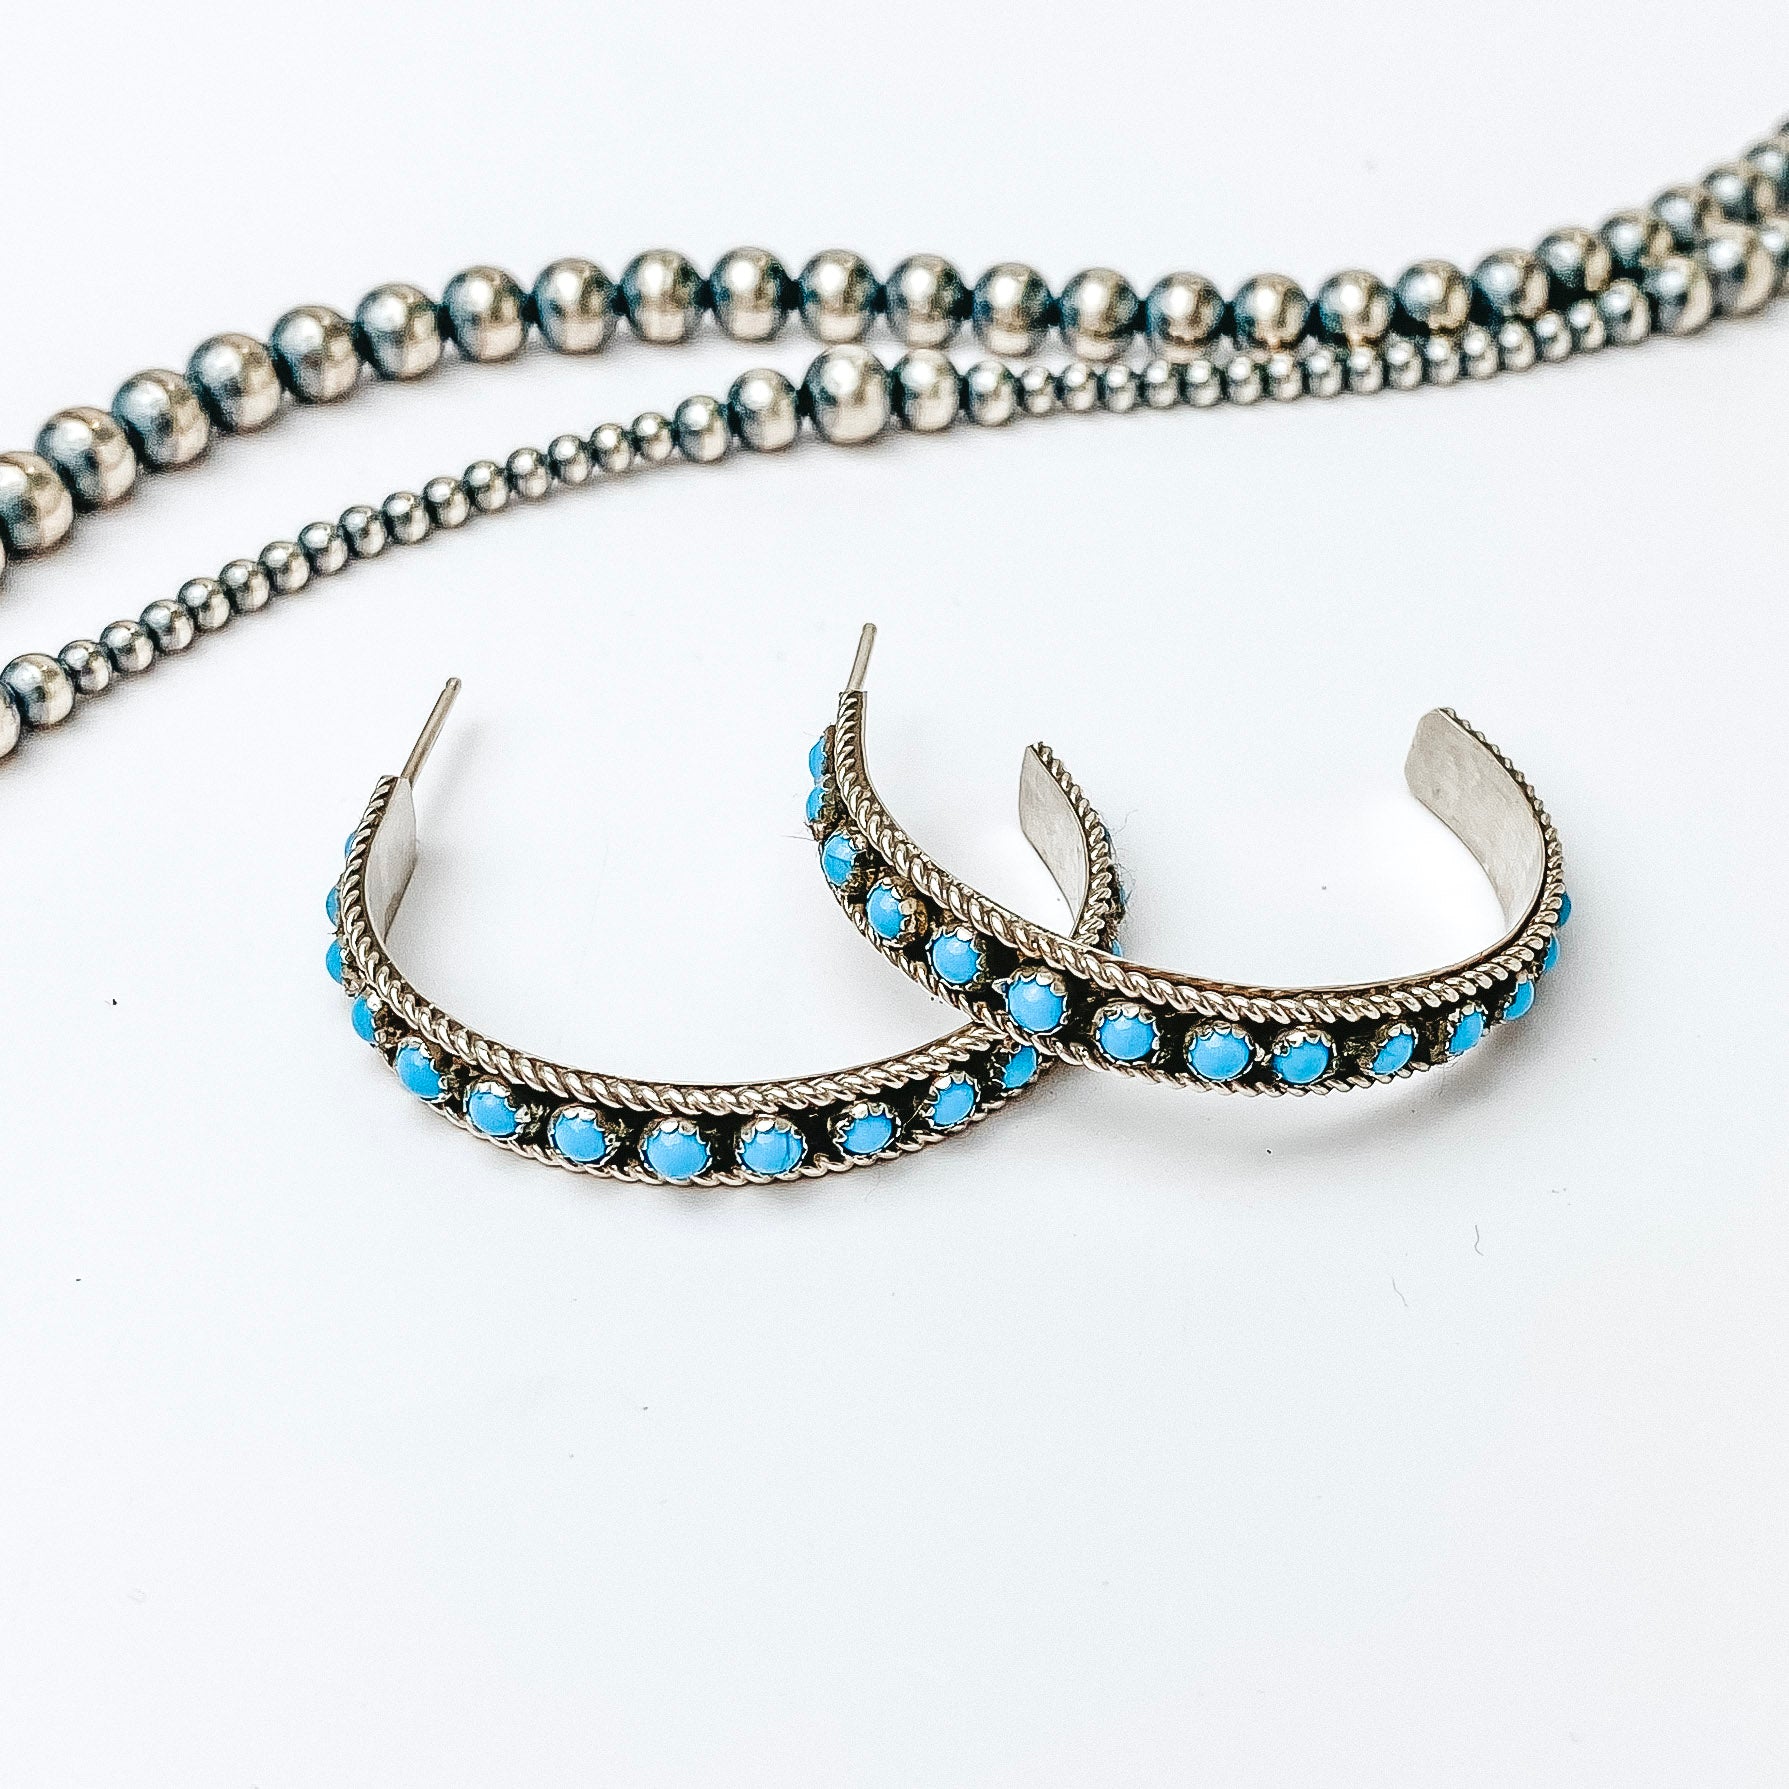 Centered is a sterling silver turquoise hoop set. Above these hoops are navajo pearls on a white background. 